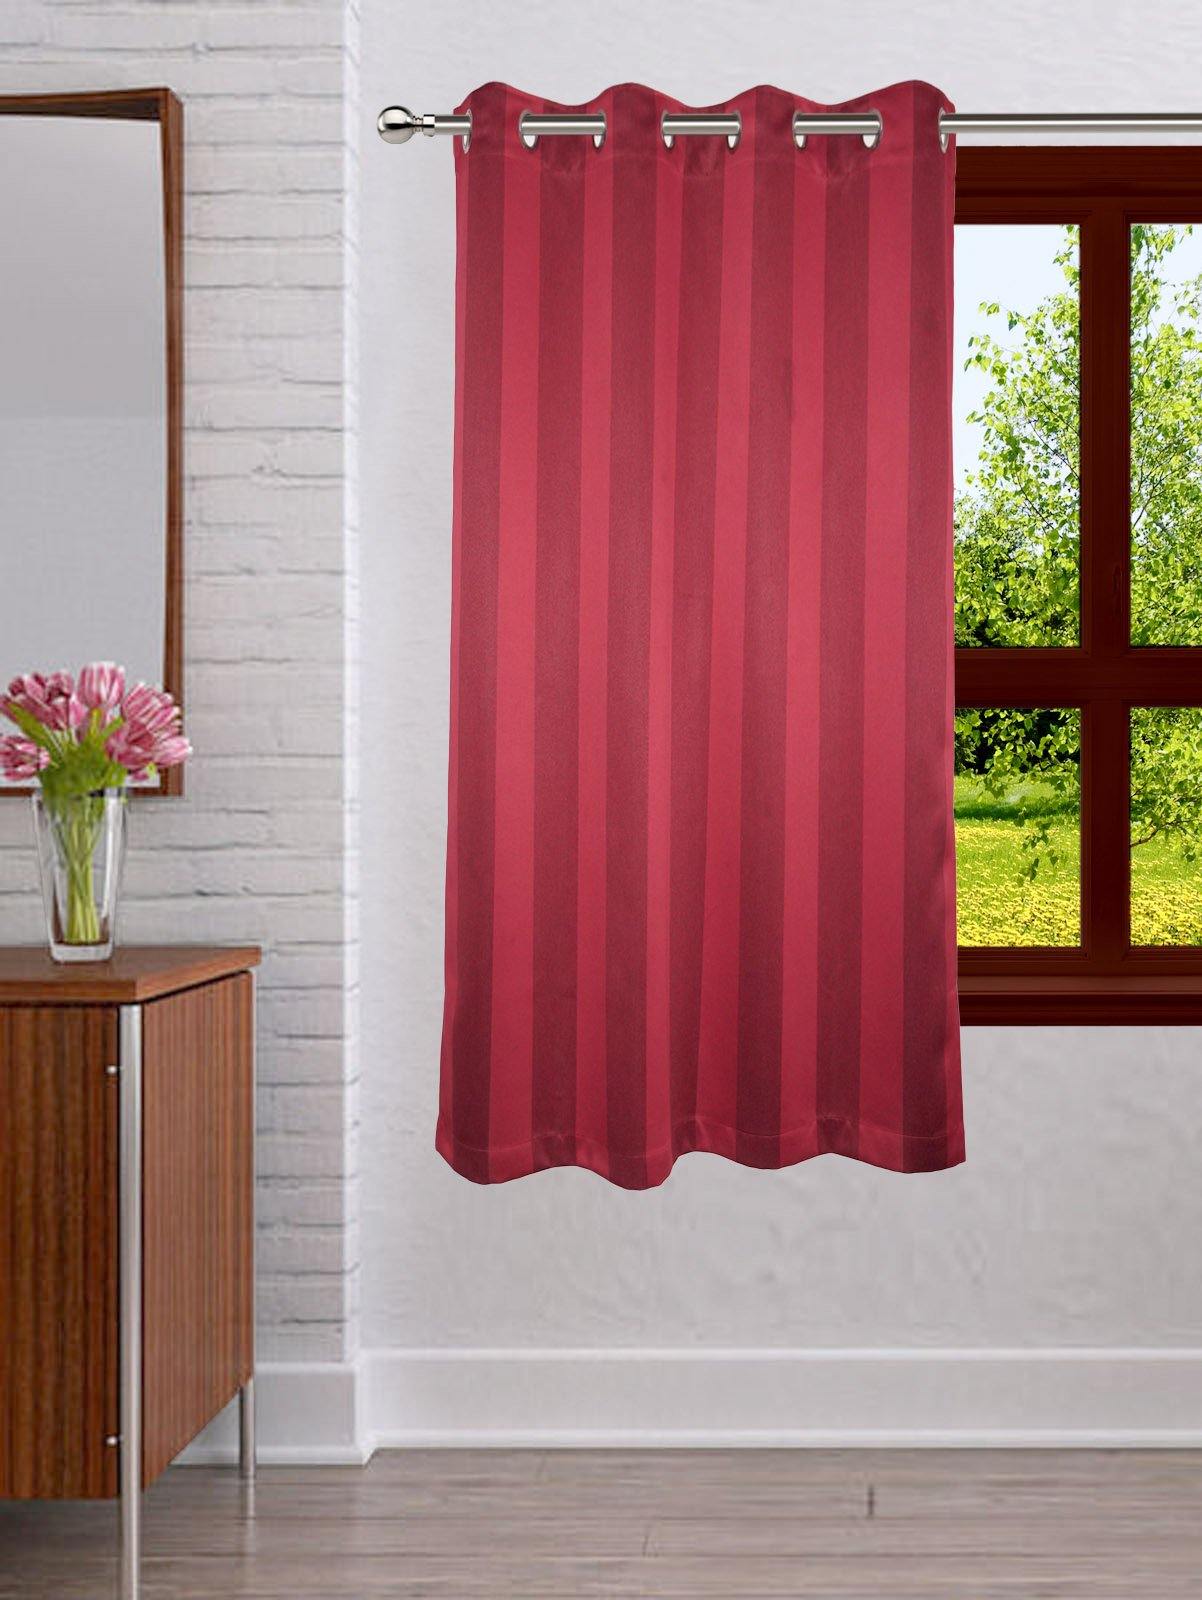 Lushomes Stripes Adorable Maroon Curtain for Window (single pc) - Lushomes